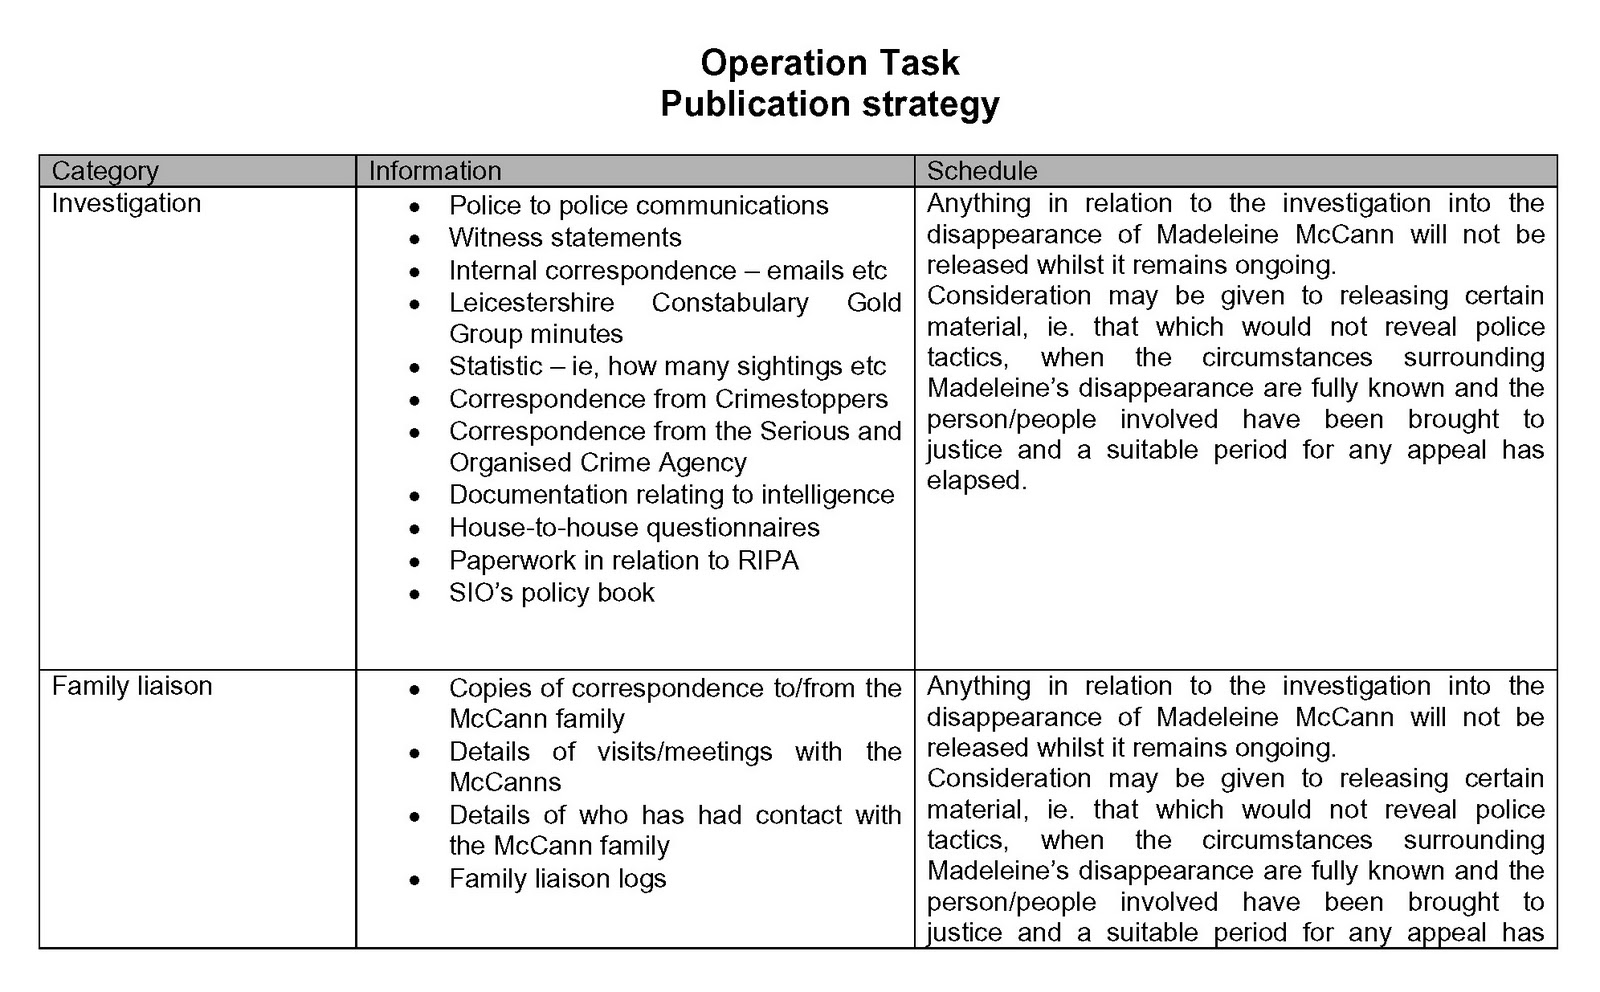 Operation Task Publication Strategy, page 1